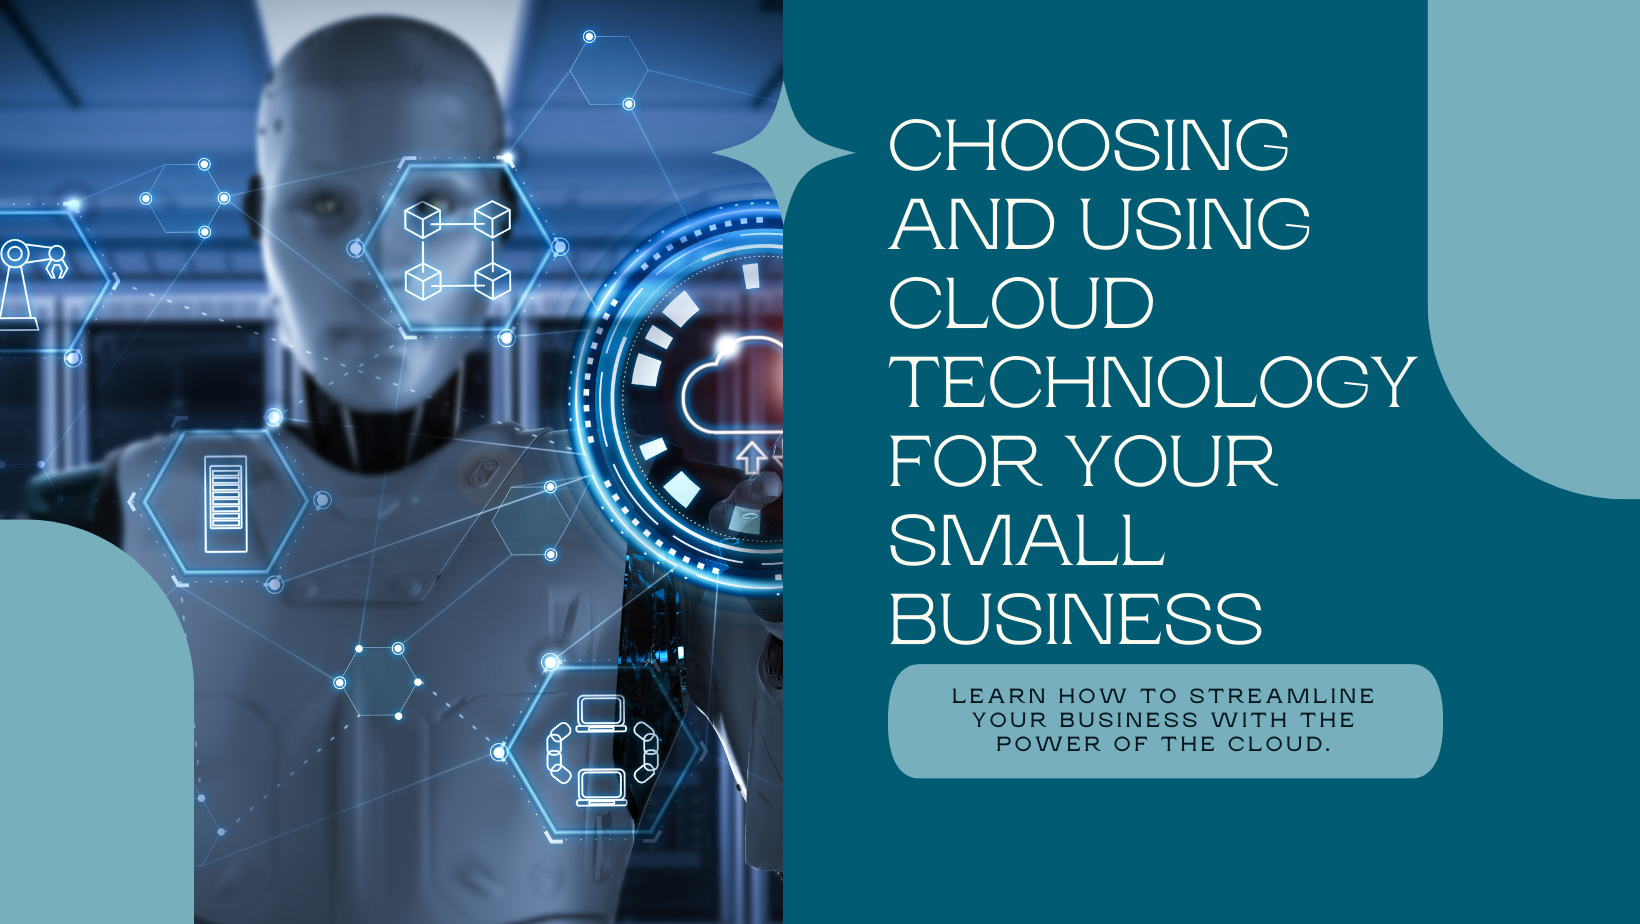 How to Choose and Use Cloud Technology for Your Small Business